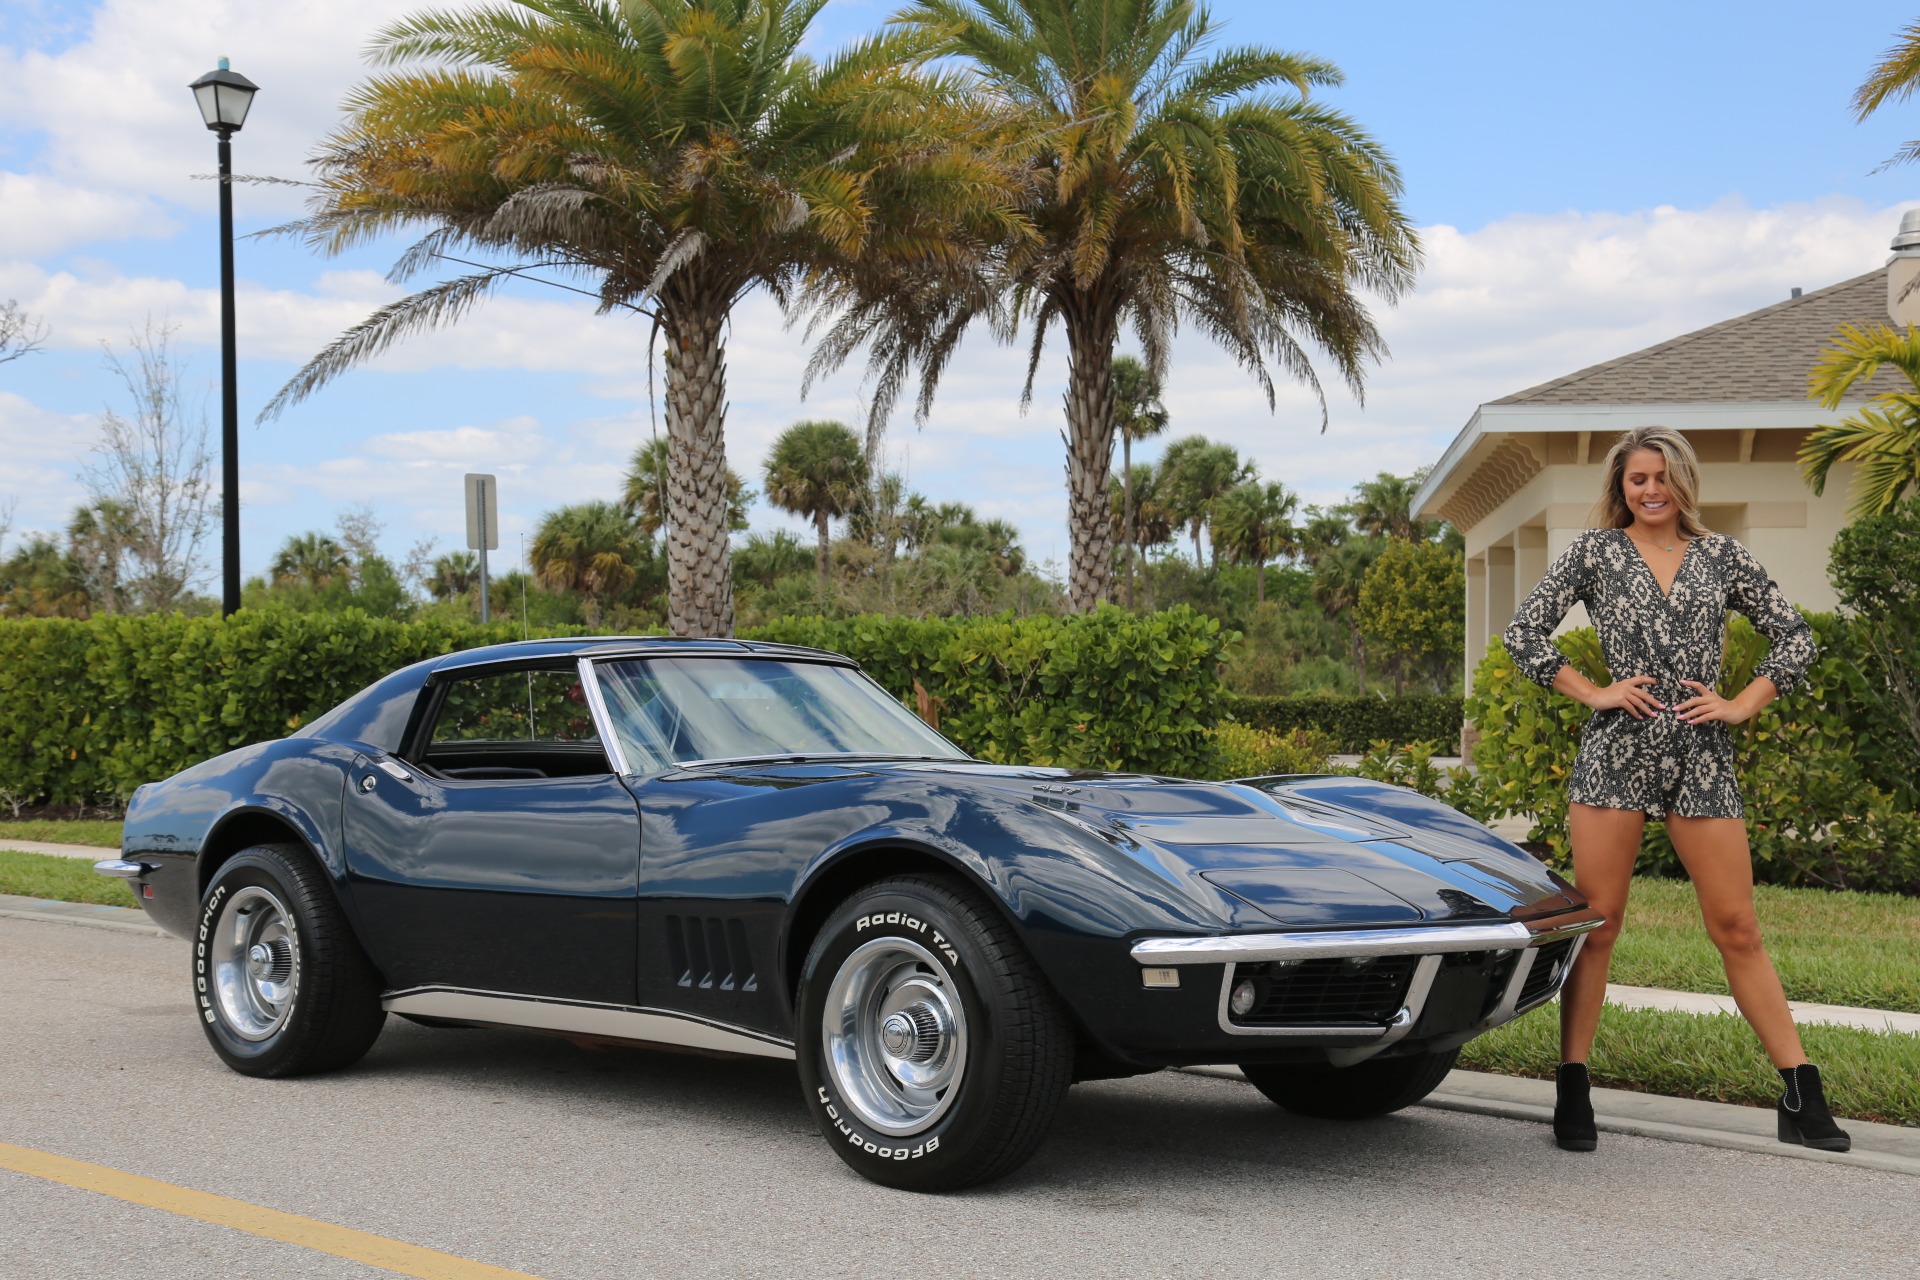 Used 1968 Chevrolet Corvette Stingray for sale Sold at Muscle Cars for Sale Inc. in Fort Myers FL 33912 3